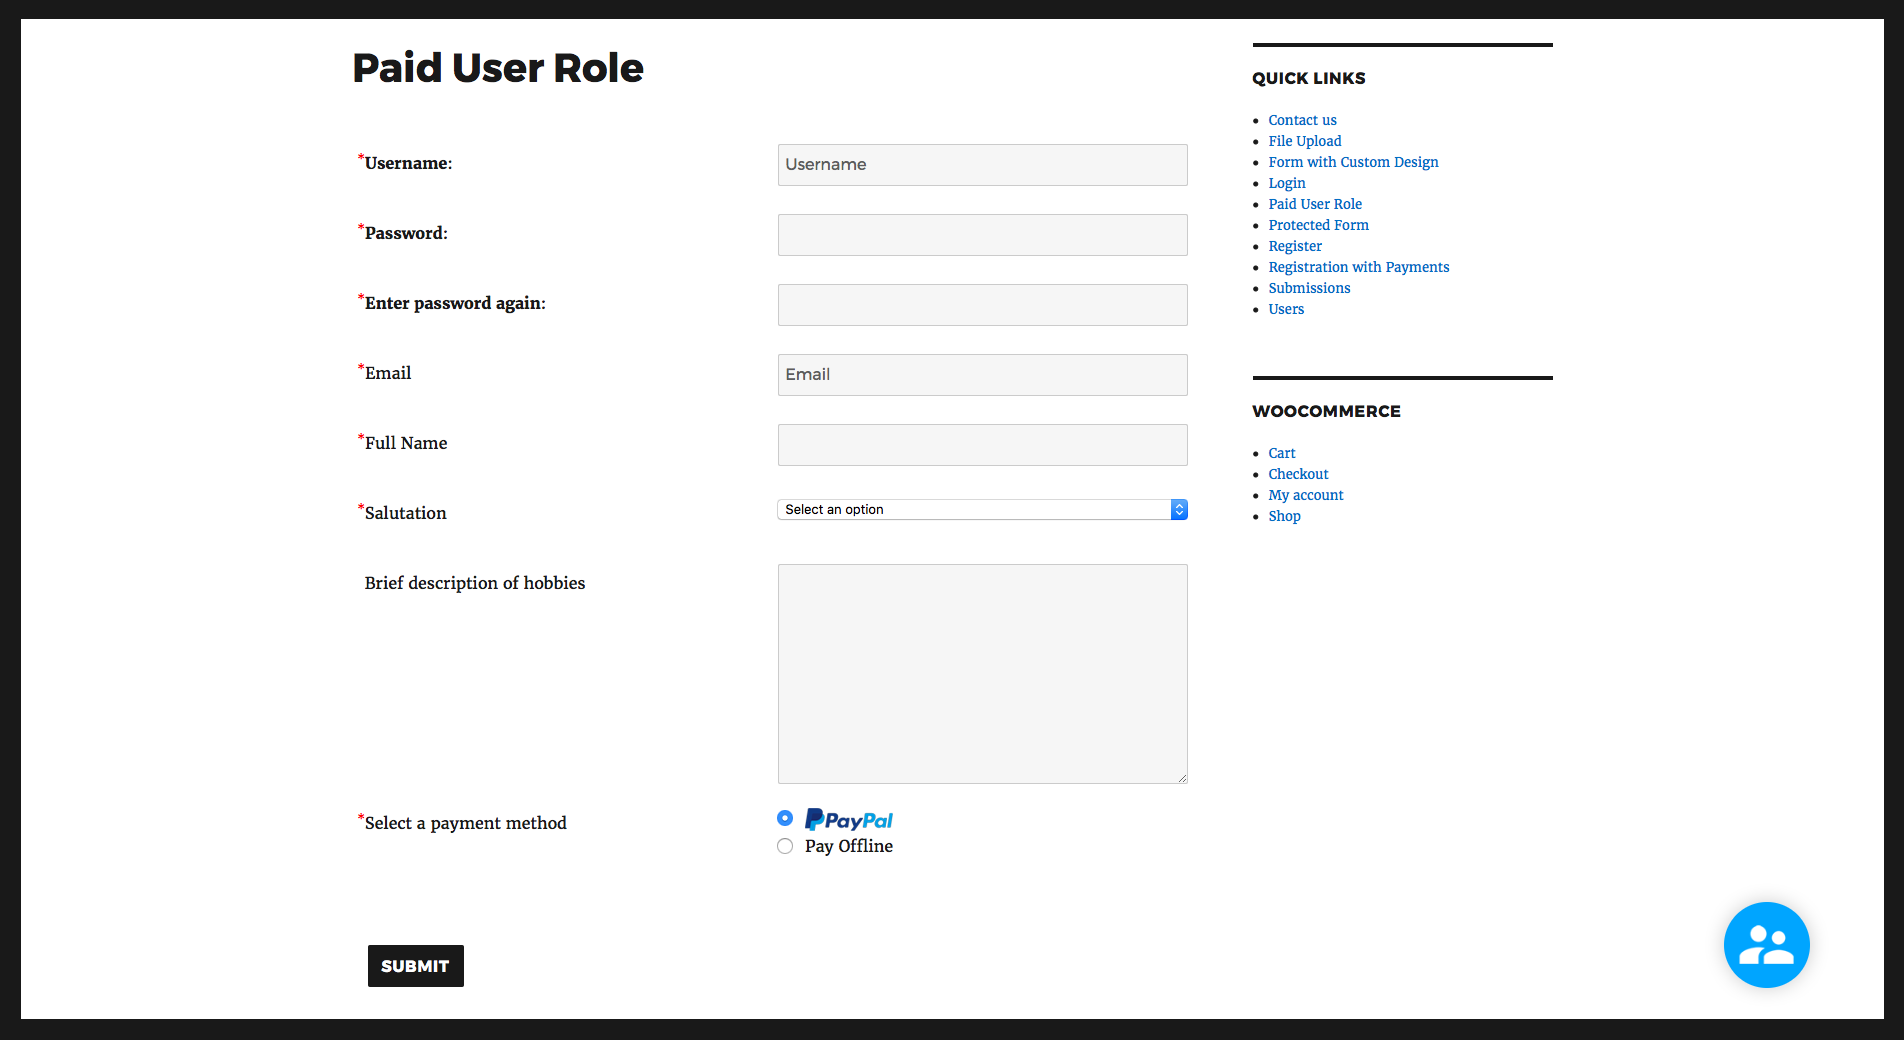 A simple user registration form with payment option.